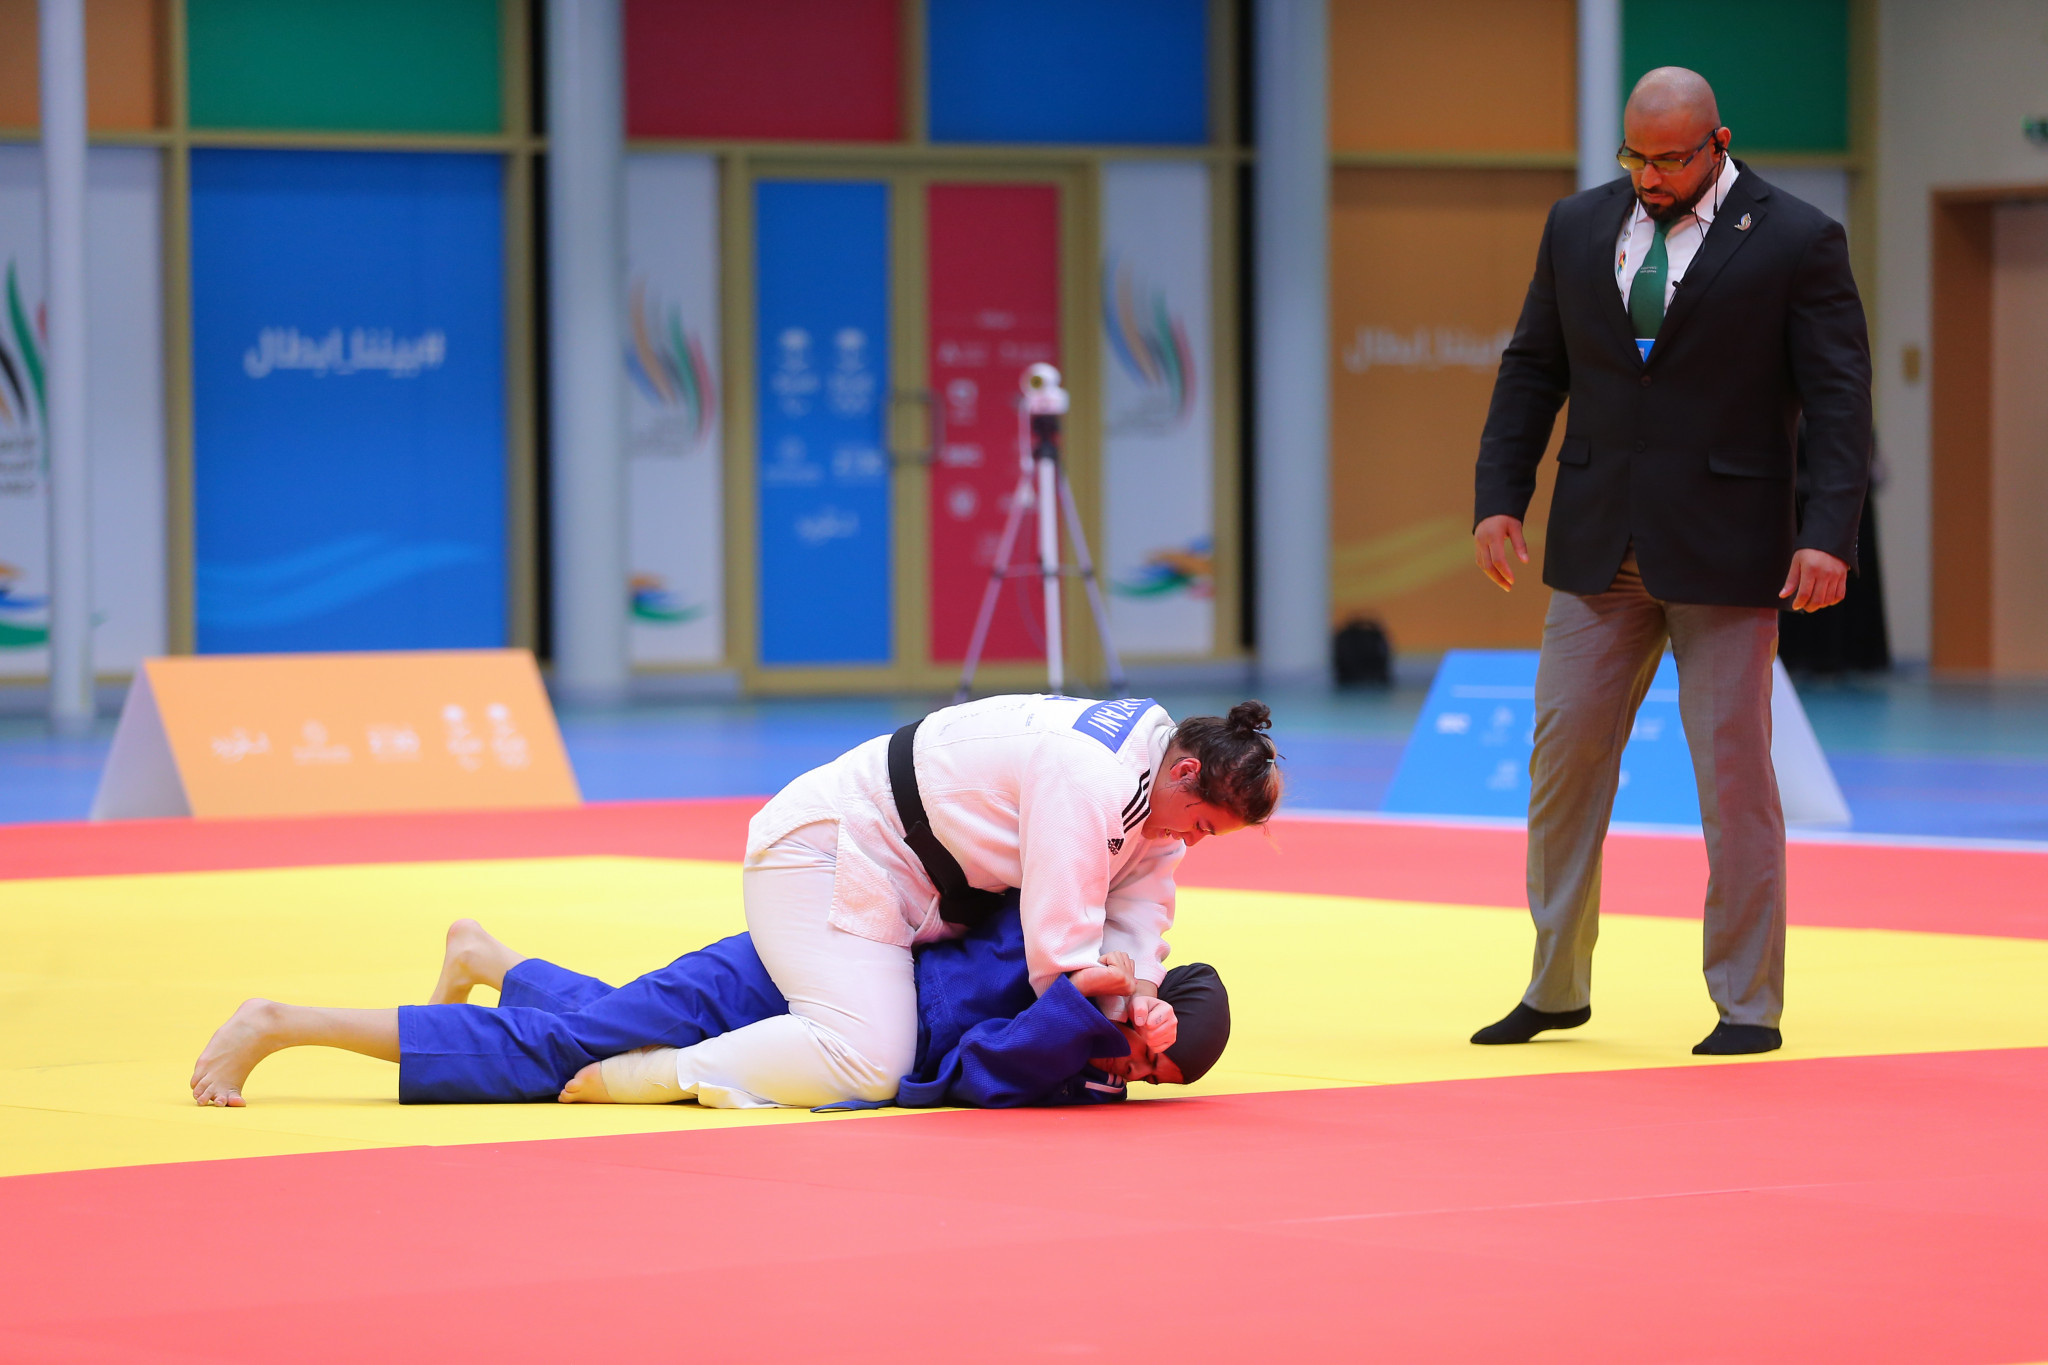 Both women's judo categories were held today to round off the sport's programme at the Saudi Games ©Saudi Games